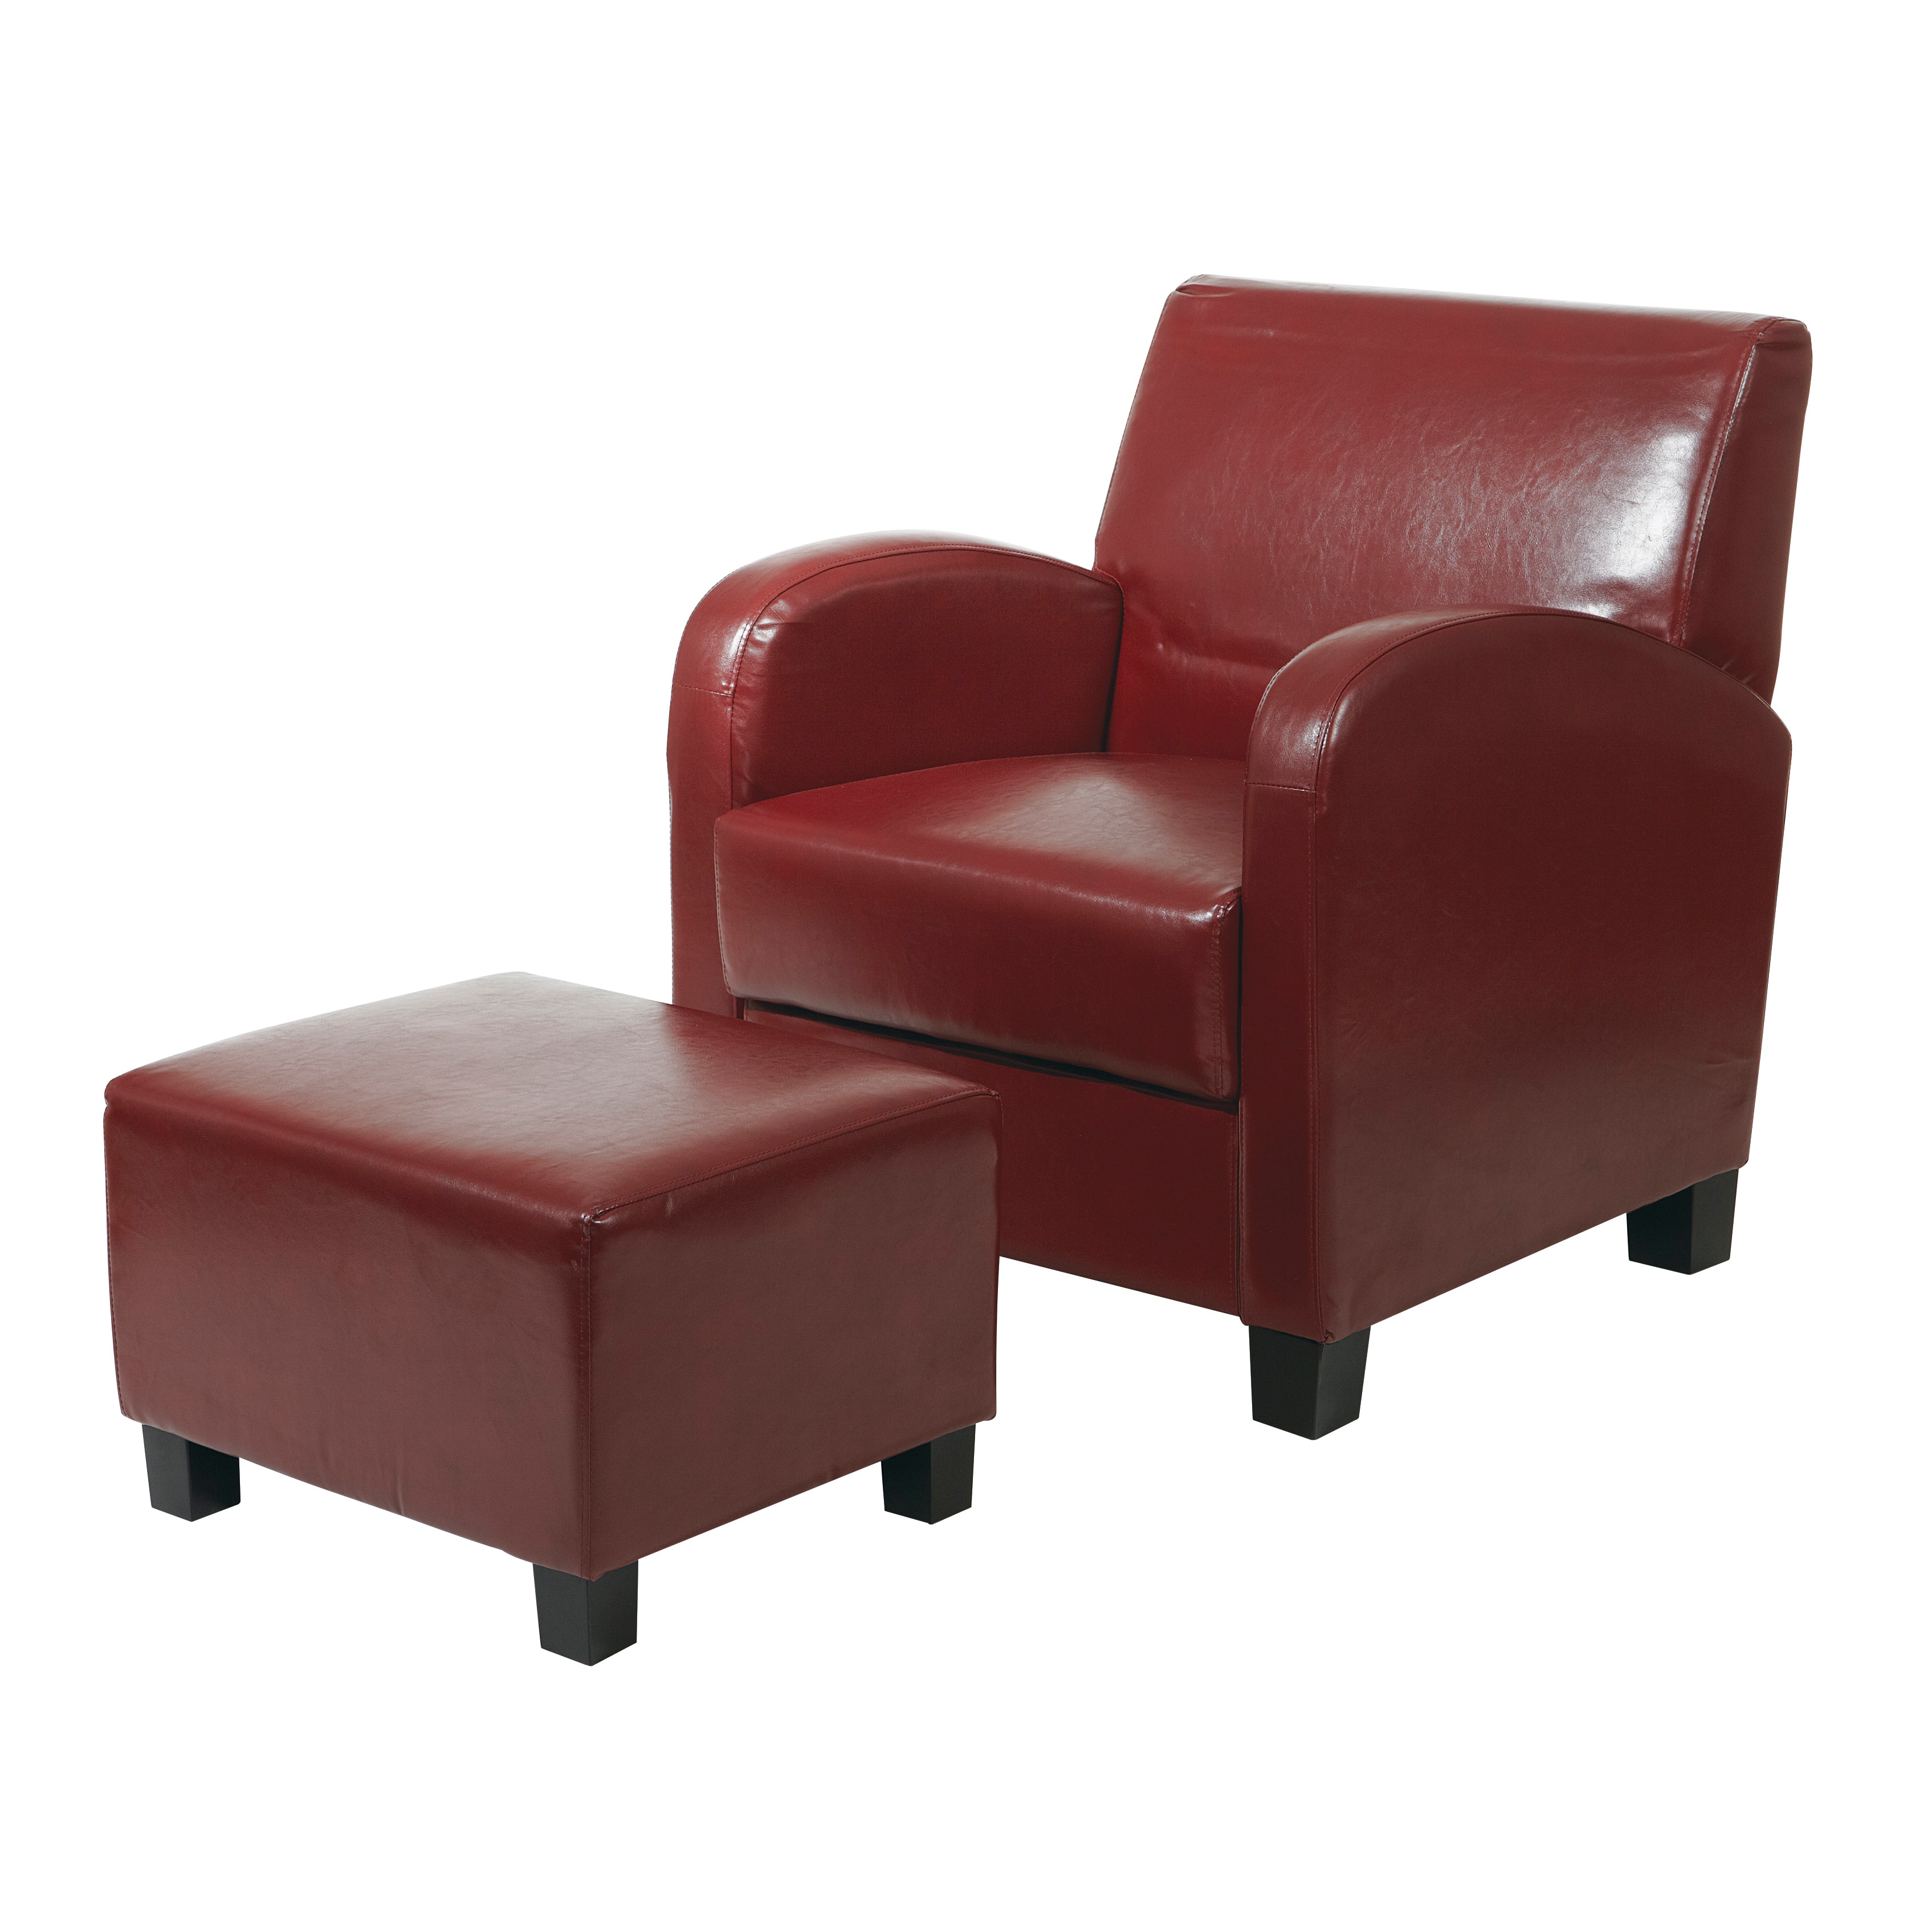 Faux Leather Chair And Ottoman | Wooden Cabinets Vintage